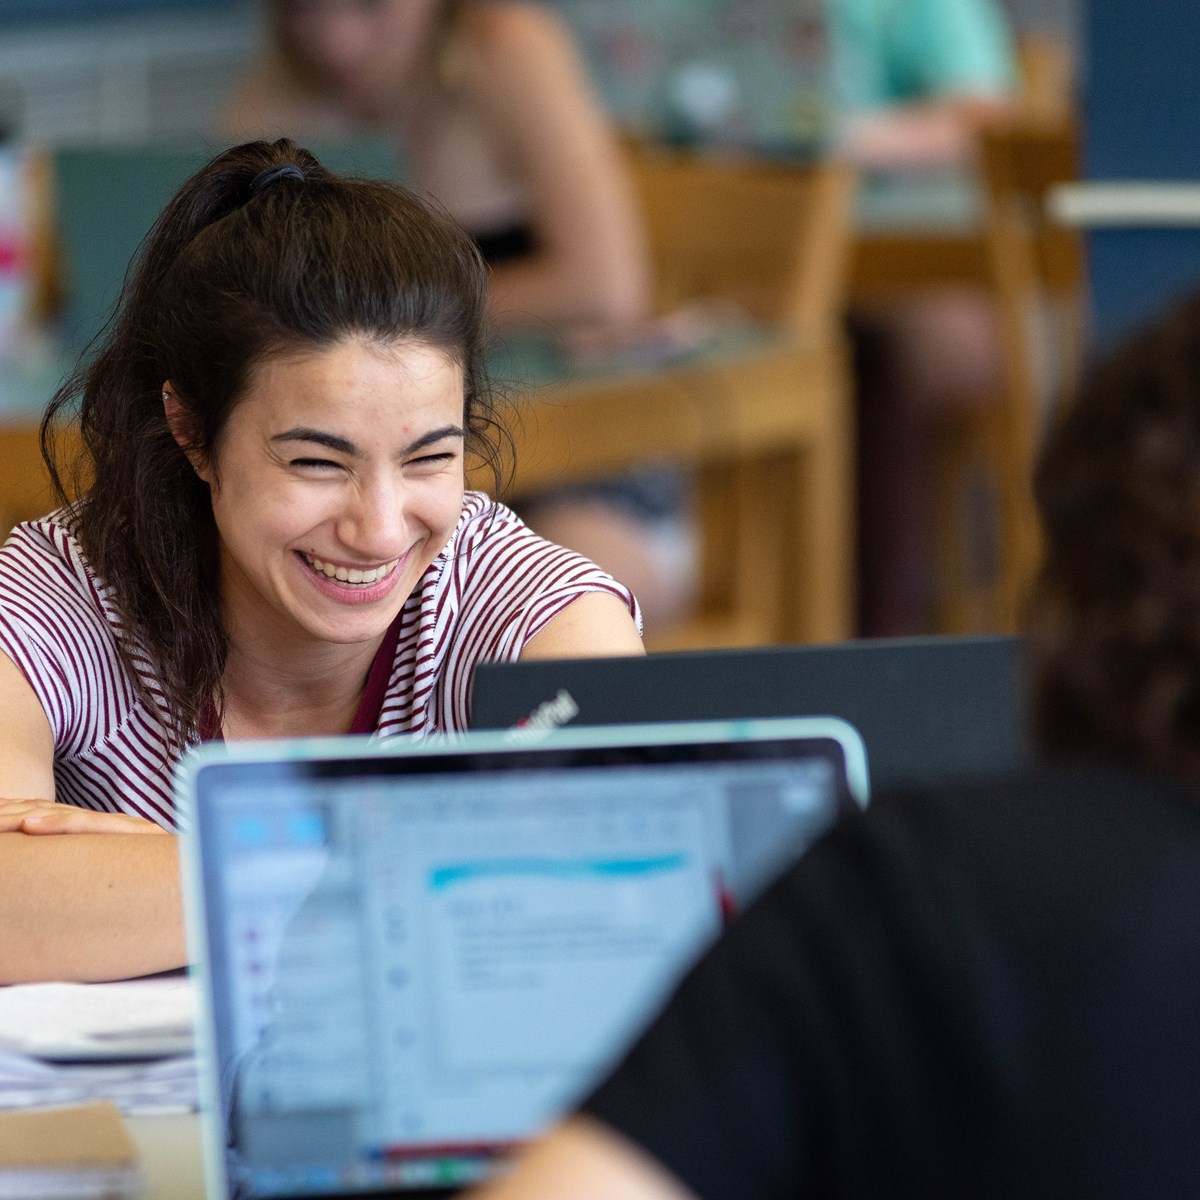 Female student smiles over top of laptop